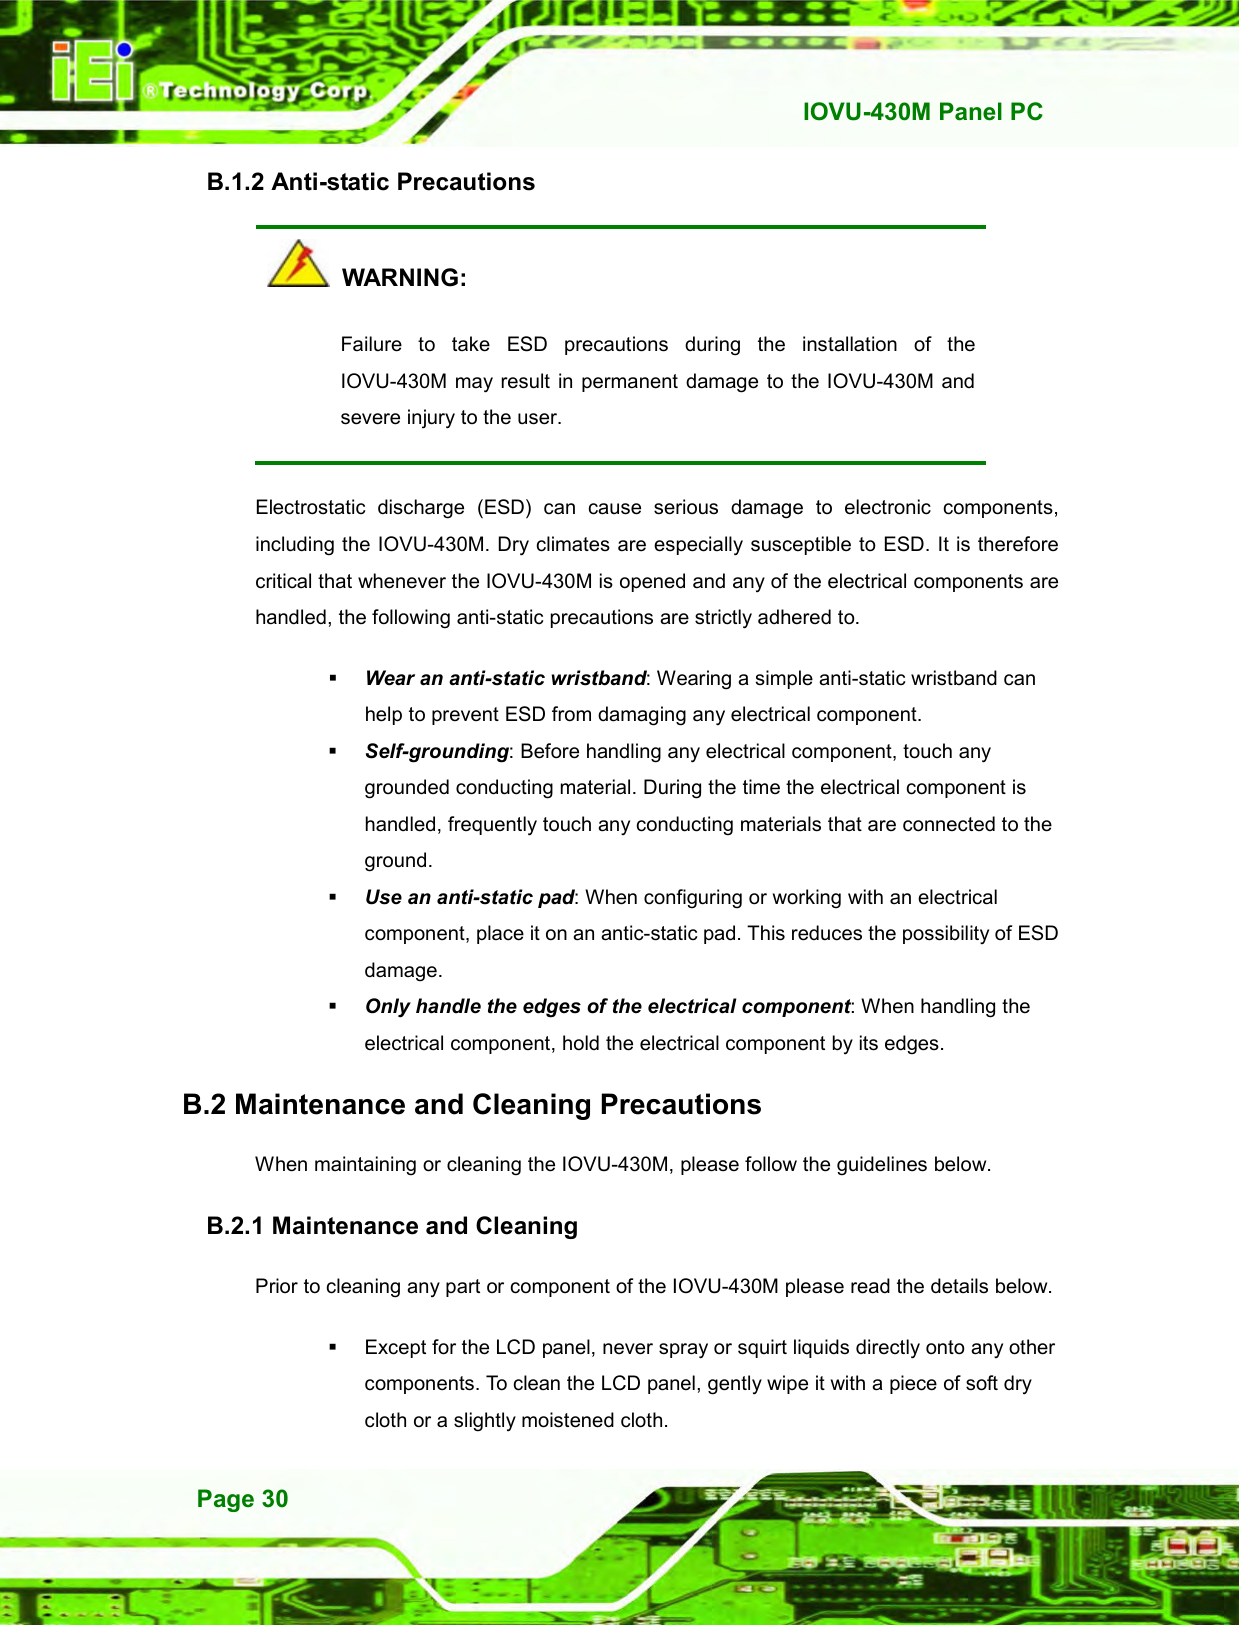   IOVU-430M Panel PC Page 30 B.1.2 Anti-static Precautions   WARNING: Failure  to  take  ESD  precautions  during  the  installation  of  the IOVU-430M may result in permanent  damage to the IOVU-430M and severe injury to the user.   Electrostatic  discharge  (ESD)  can  cause  serious  damage  to  electronic  components, including the IOVU-430M. Dry climates are especially susceptible to ESD. It is therefore critical that whenever the IOVU-430M is opened and any of the electrical components are handled, the following anti-static precautions are strictly adhered to.  Wear an anti-static wristband: Wearing a simple anti-static wristband can help to prevent ESD from damaging any electrical component.  Self-grounding: Before handling any electrical component, touch any grounded conducting material. During the time the electrical component is handled, frequently touch any conducting materials that are connected to the ground.  Use an anti-static pad: When configuring or working with an electrical component, place it on an antic-static pad. This reduces the possibility of ESD damage.  Only handle the edges of the electrical component: When handling the electrical component, hold the electrical component by its edges. B.2 Maintenance and Cleaning Precautions When maintaining or cleaning the IOVU-430M, please follow the guidelines below. B.2.1 Maintenance and Cleaning Prior to cleaning any part or component of the IOVU-430M please read the details below.   Except for the LCD panel, never spray or squirt liquids directly onto any other components. To clean the LCD panel, gently wipe it with a piece of soft dry cloth or a slightly moistened cloth. 